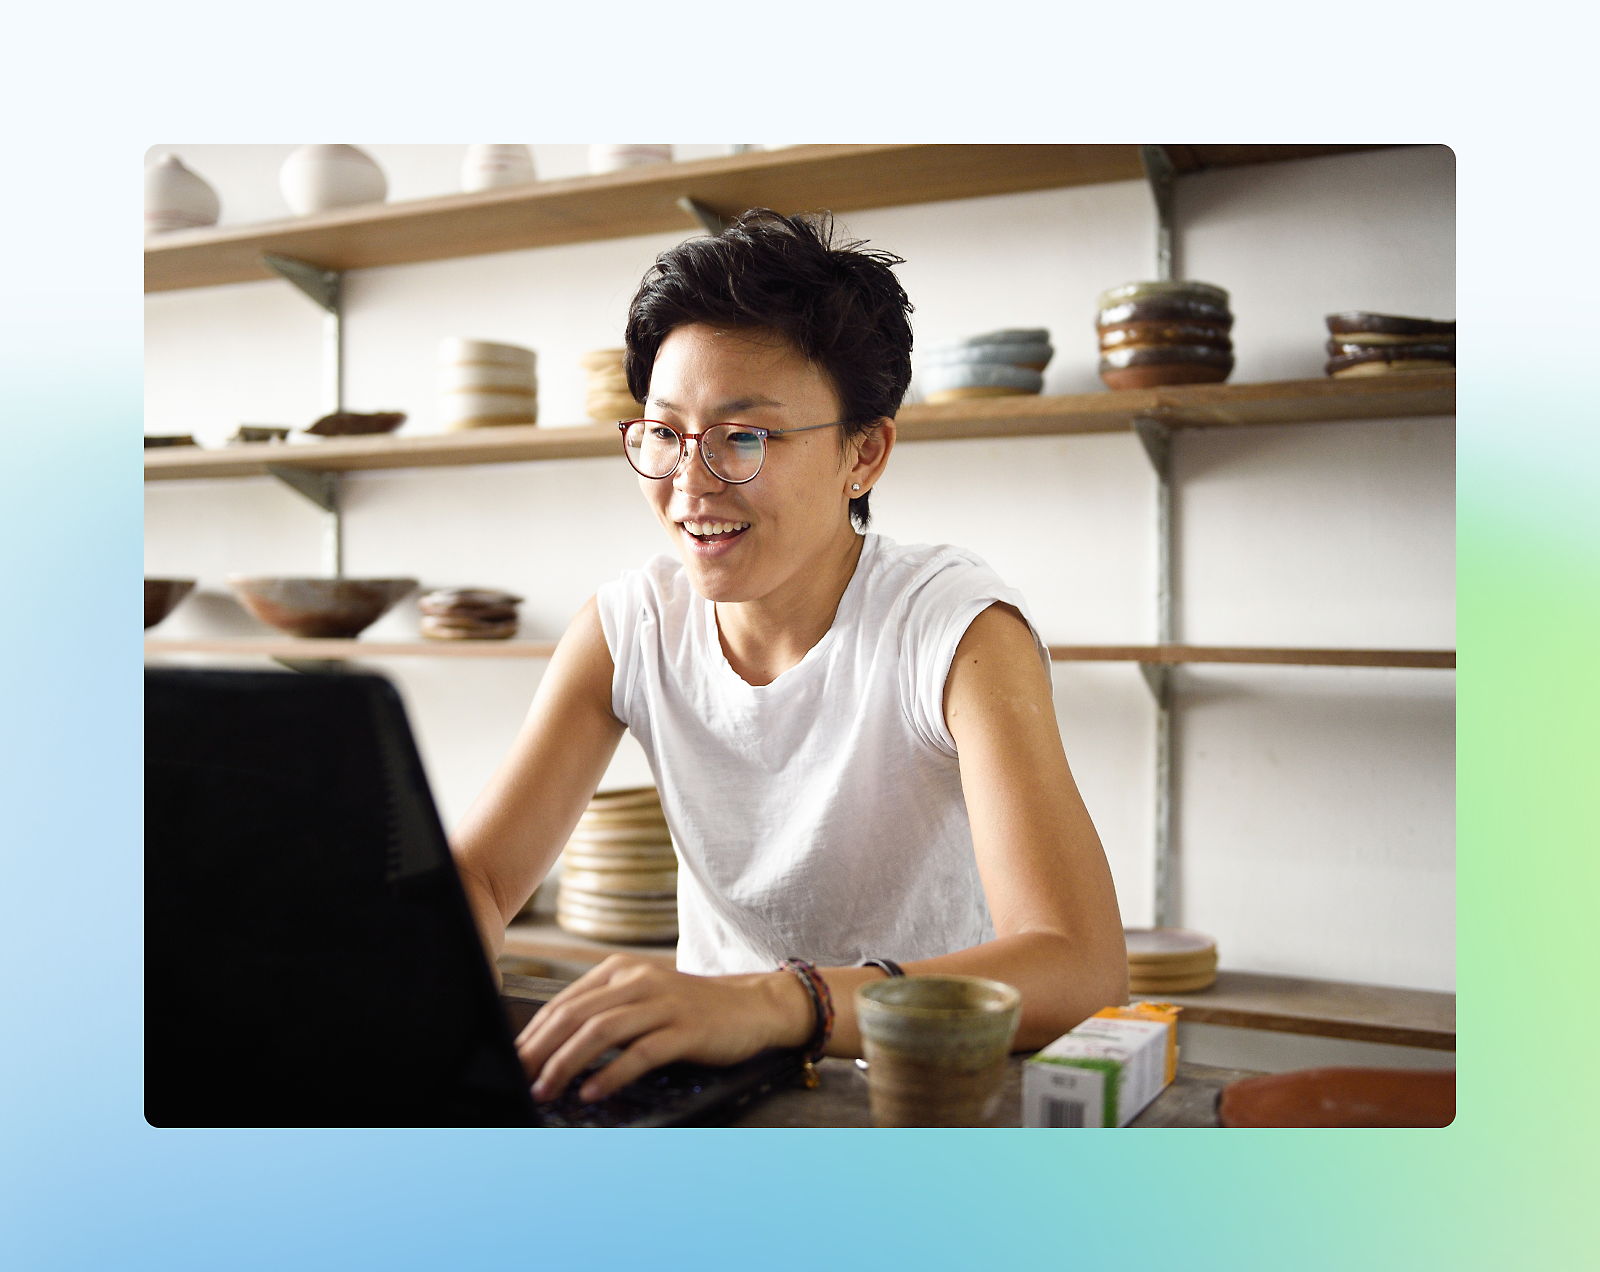 A person wearing glasses and a white t-shirt smiles while using a laptop in a room with shelves full of pottery.